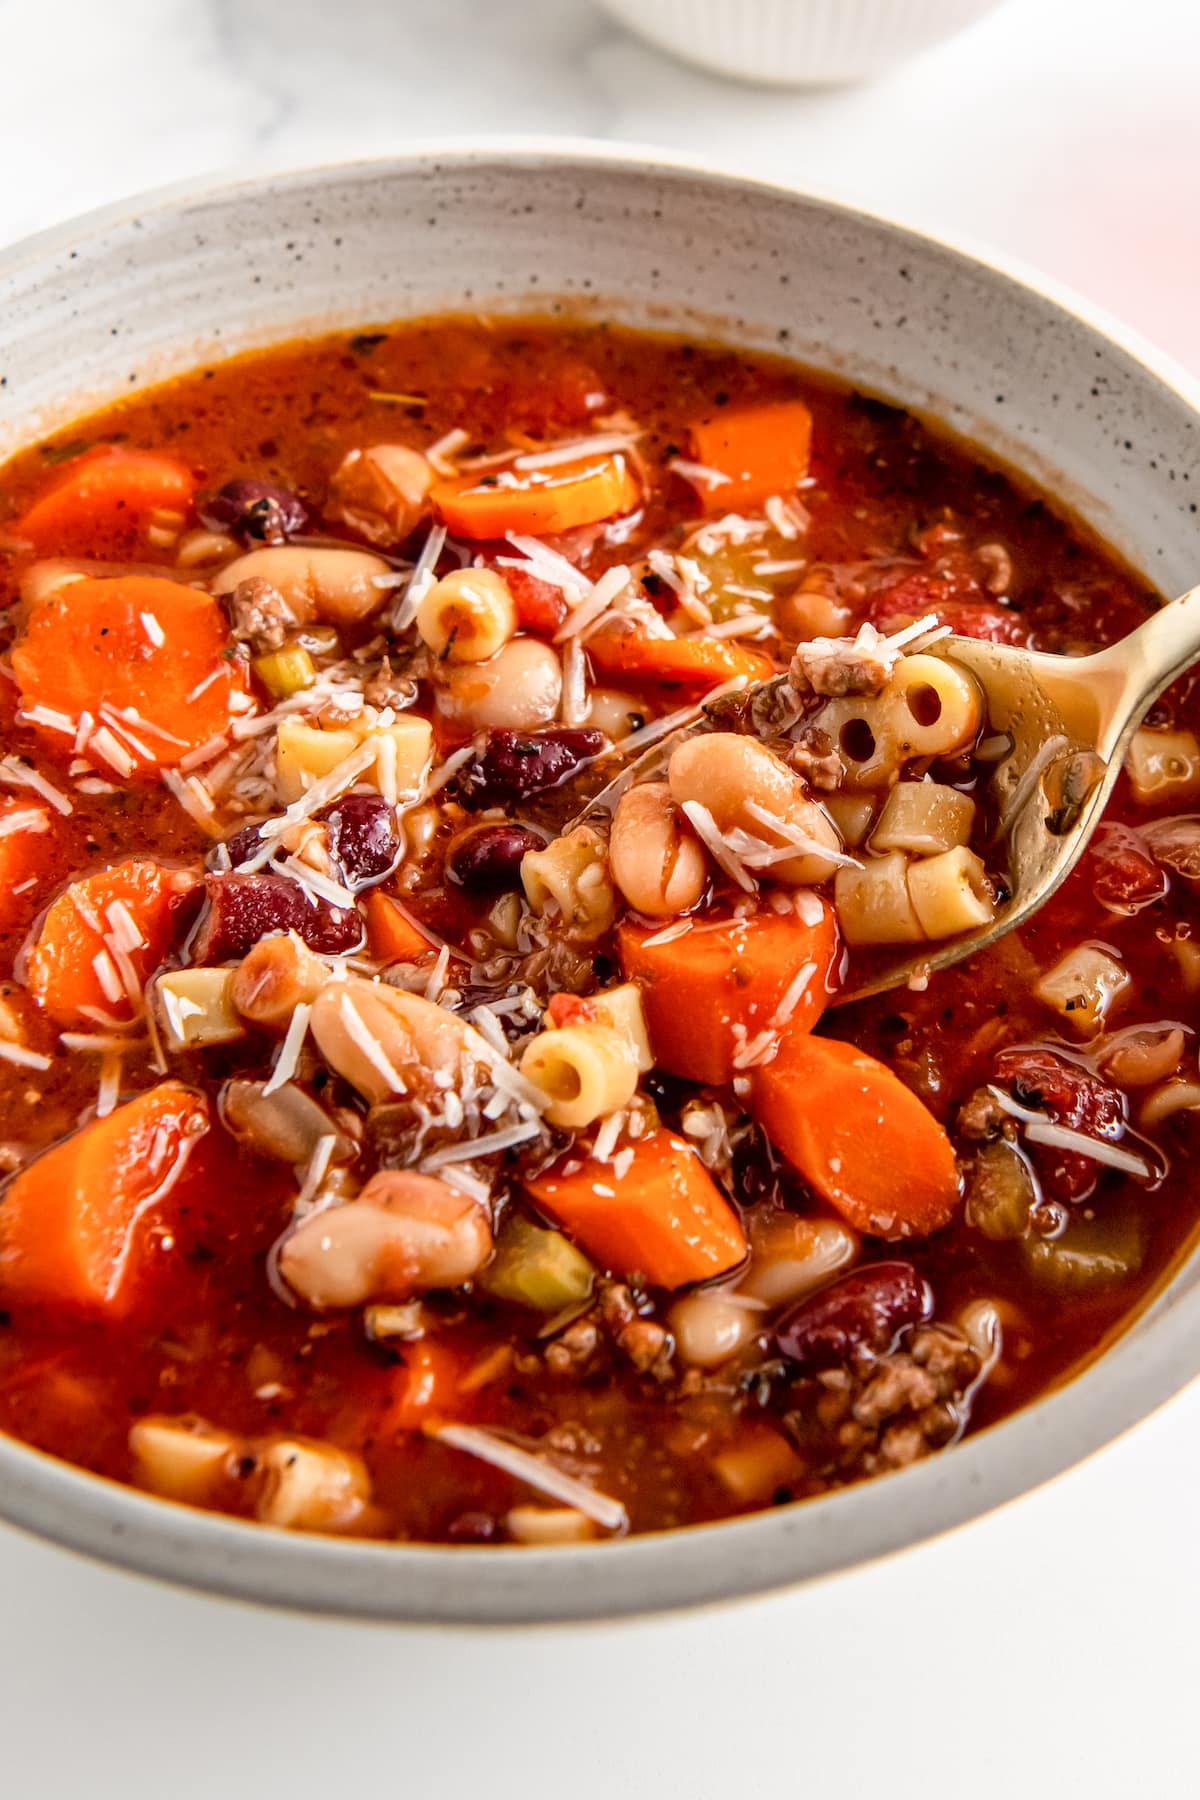 a bowl of fagioli soup with noodles, beef, and vegetables